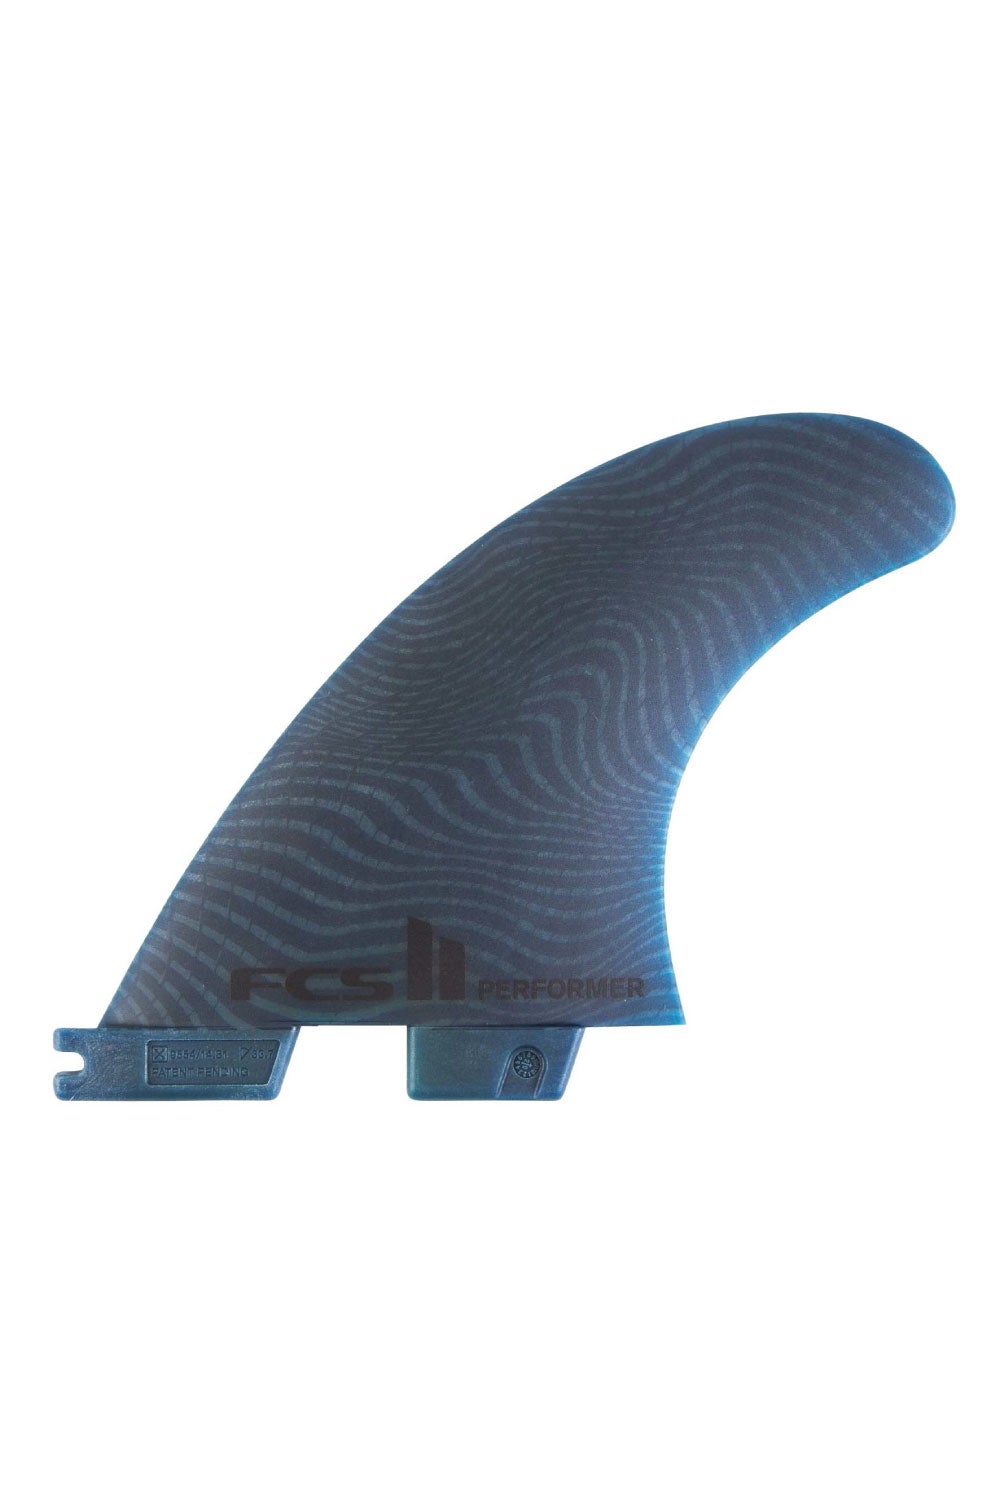 FCS II Performer Neo Glass Pacific Fins - Large